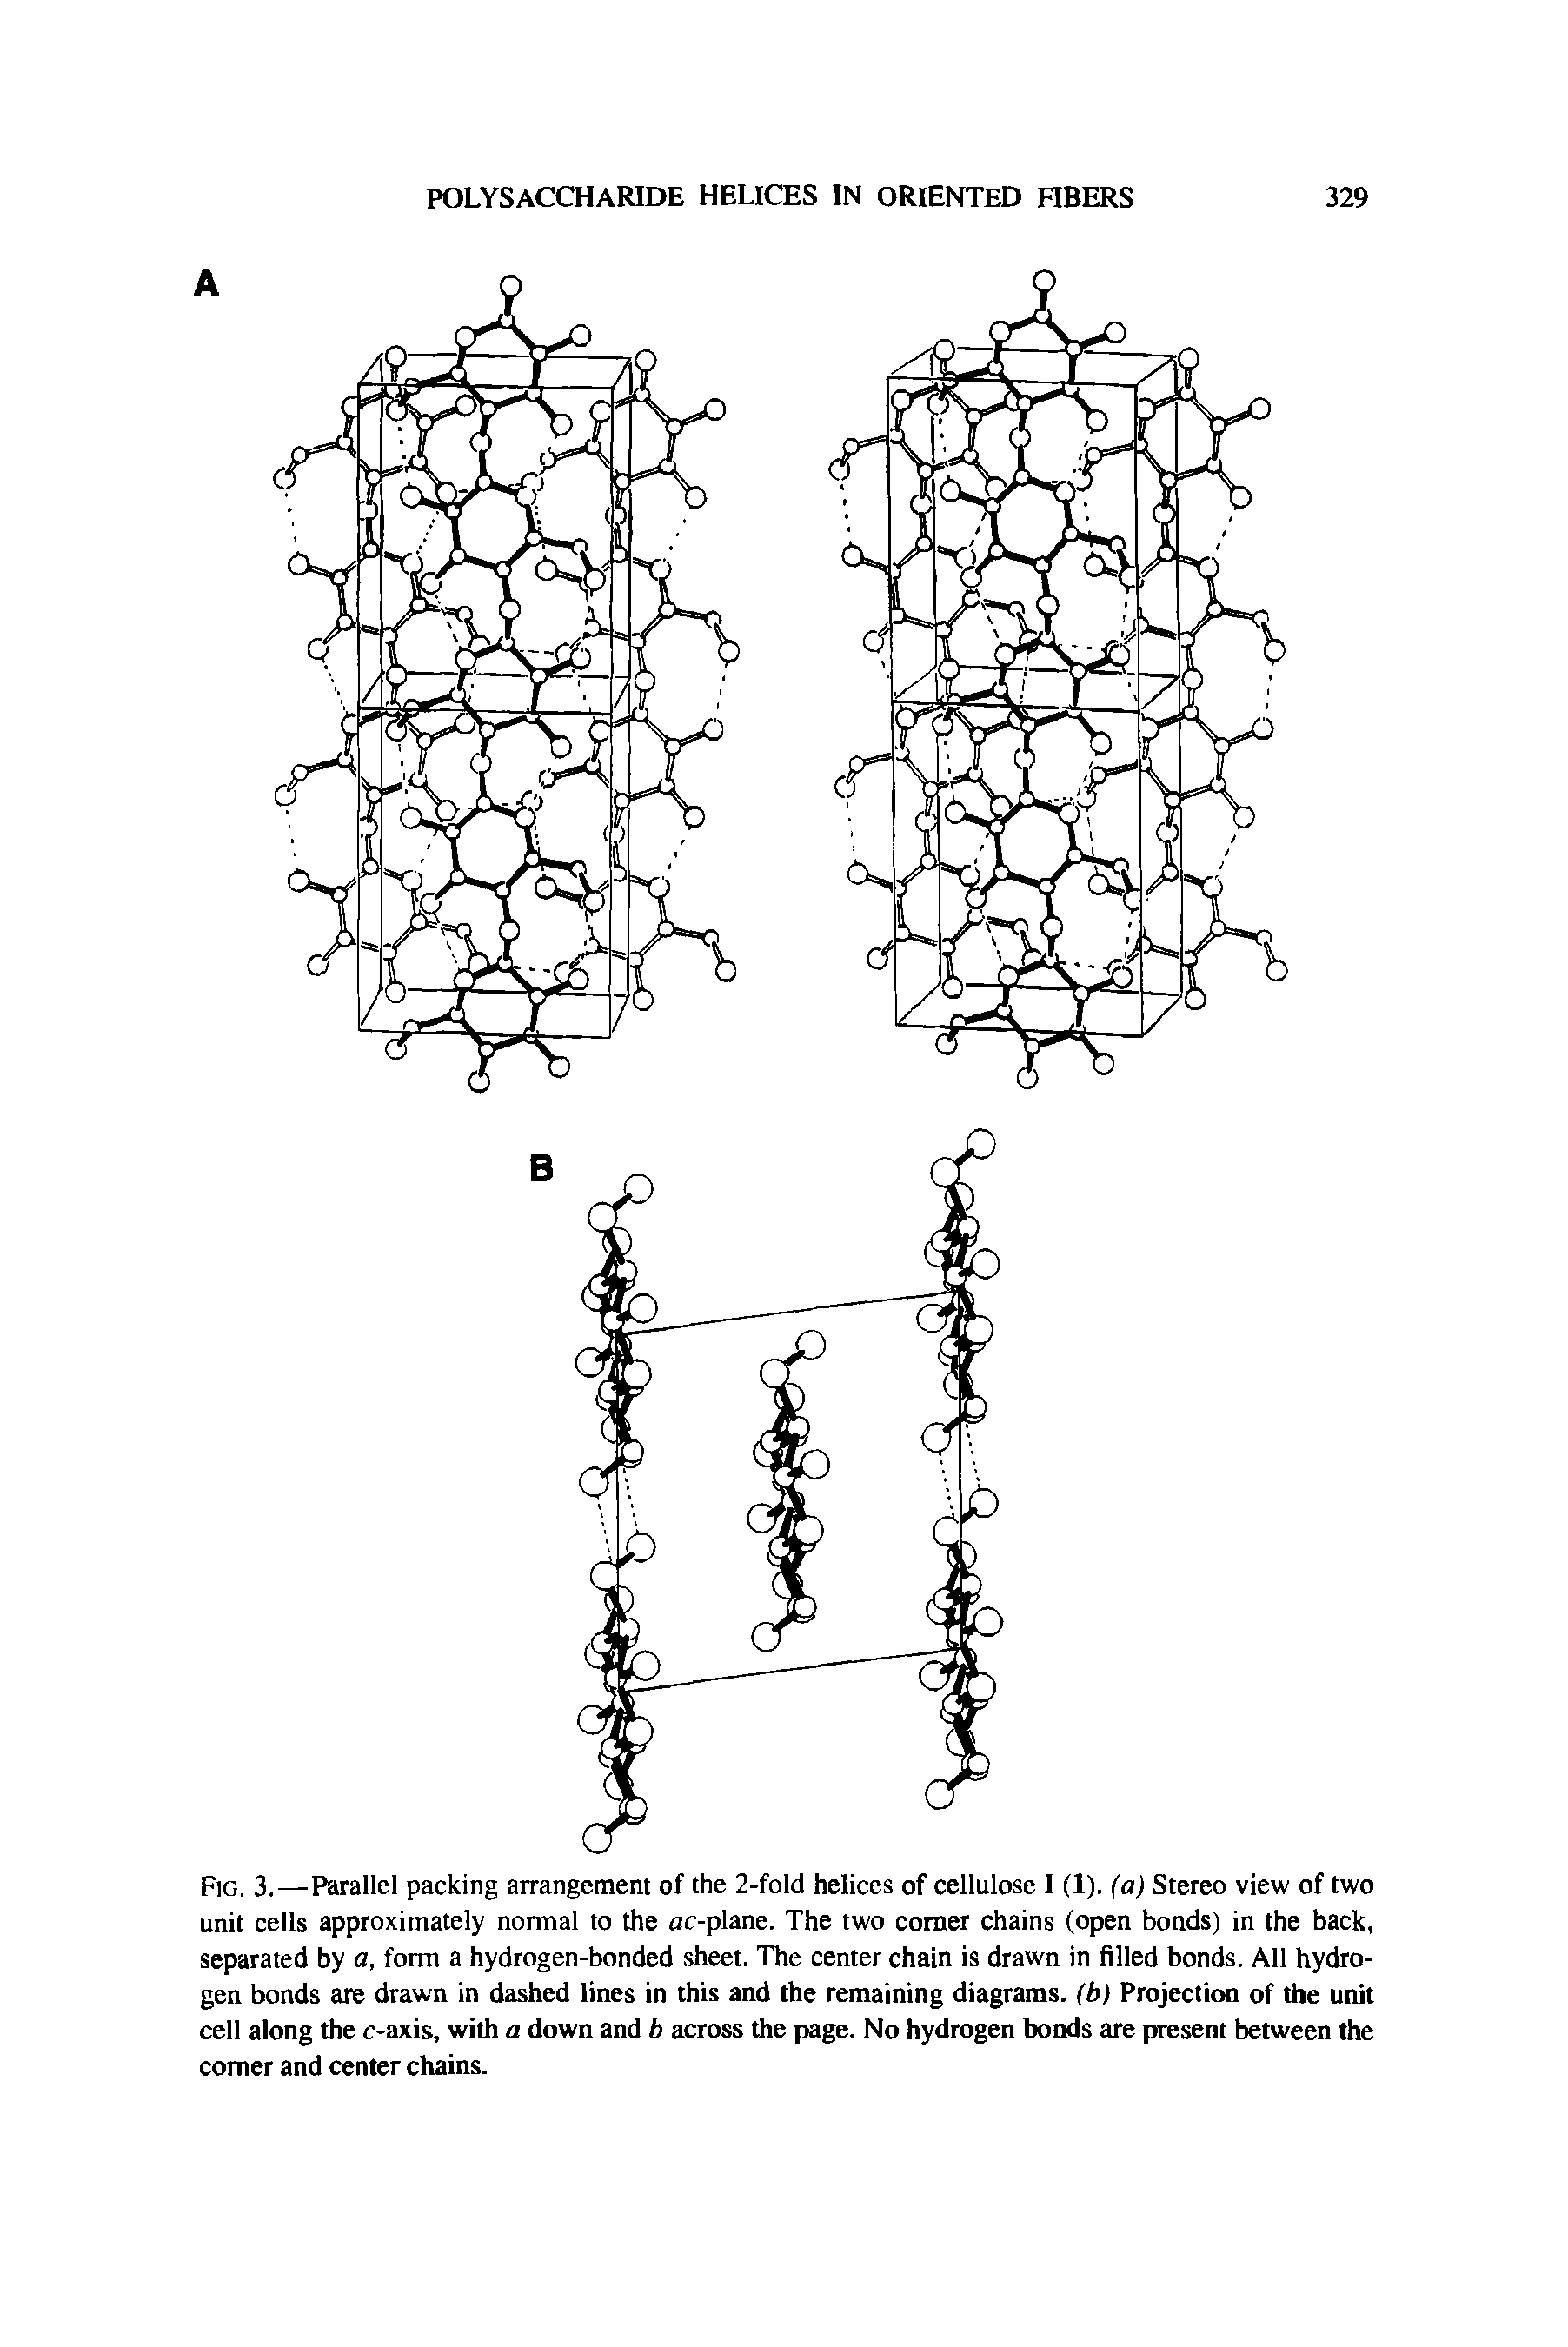 Fig. 3.—Parallel packing arrangement of the 2-fold helices of cellulose I (1). (a) Stereo view of two unit cells approximately normal to the ac-plane. The two comer chains (open bonds) in the back, separated by a, form a hydrogen-bonded sheet. The center chain is drawn in filled bonds. All hydrogen bonds are drawn in dashed lines in this and the remaining diagrams, (b) Projection of the unit cell along the c-axis, with a down and b across the page. No hydrogen bonds are present between the comer and center chains.